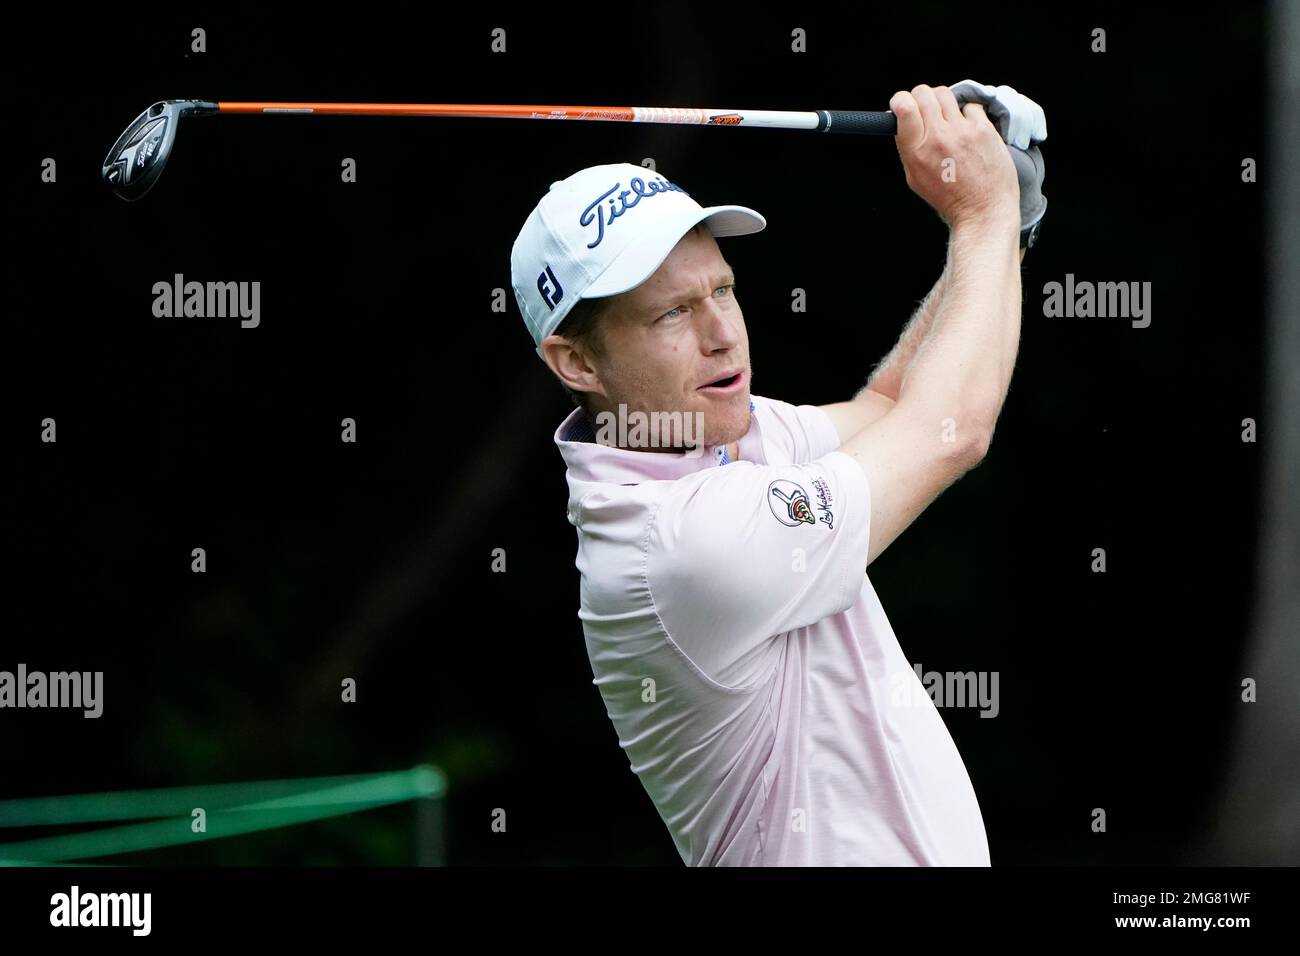 Peter Malnati drives on the second hole during the third round of the